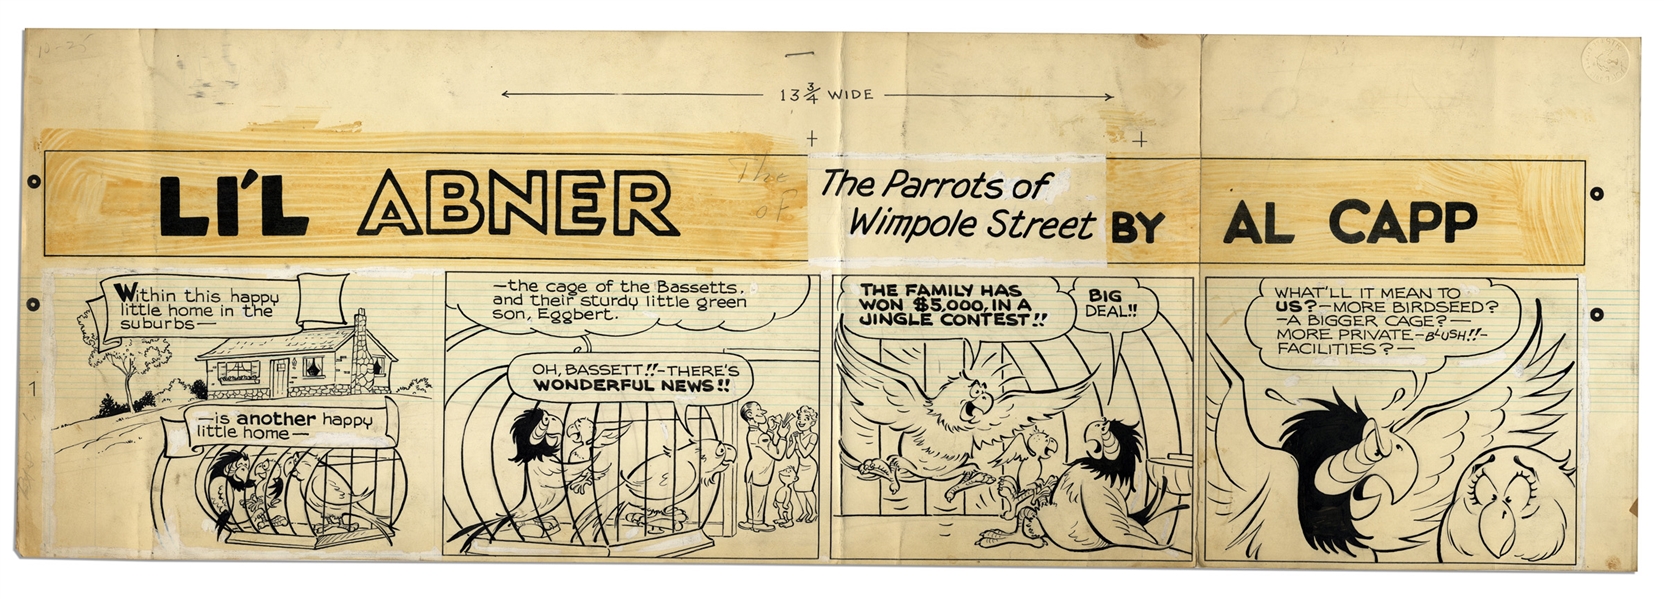 ''Li'l Abner'' Sunday Strip Hand-Drawn by Frank Frazetta & Al Capp From 29 October 1959 -- Featuring the Parrots of Wimpole Street -- 29'' x 9.75'' -- Very Good -- From the Al Capp Estate